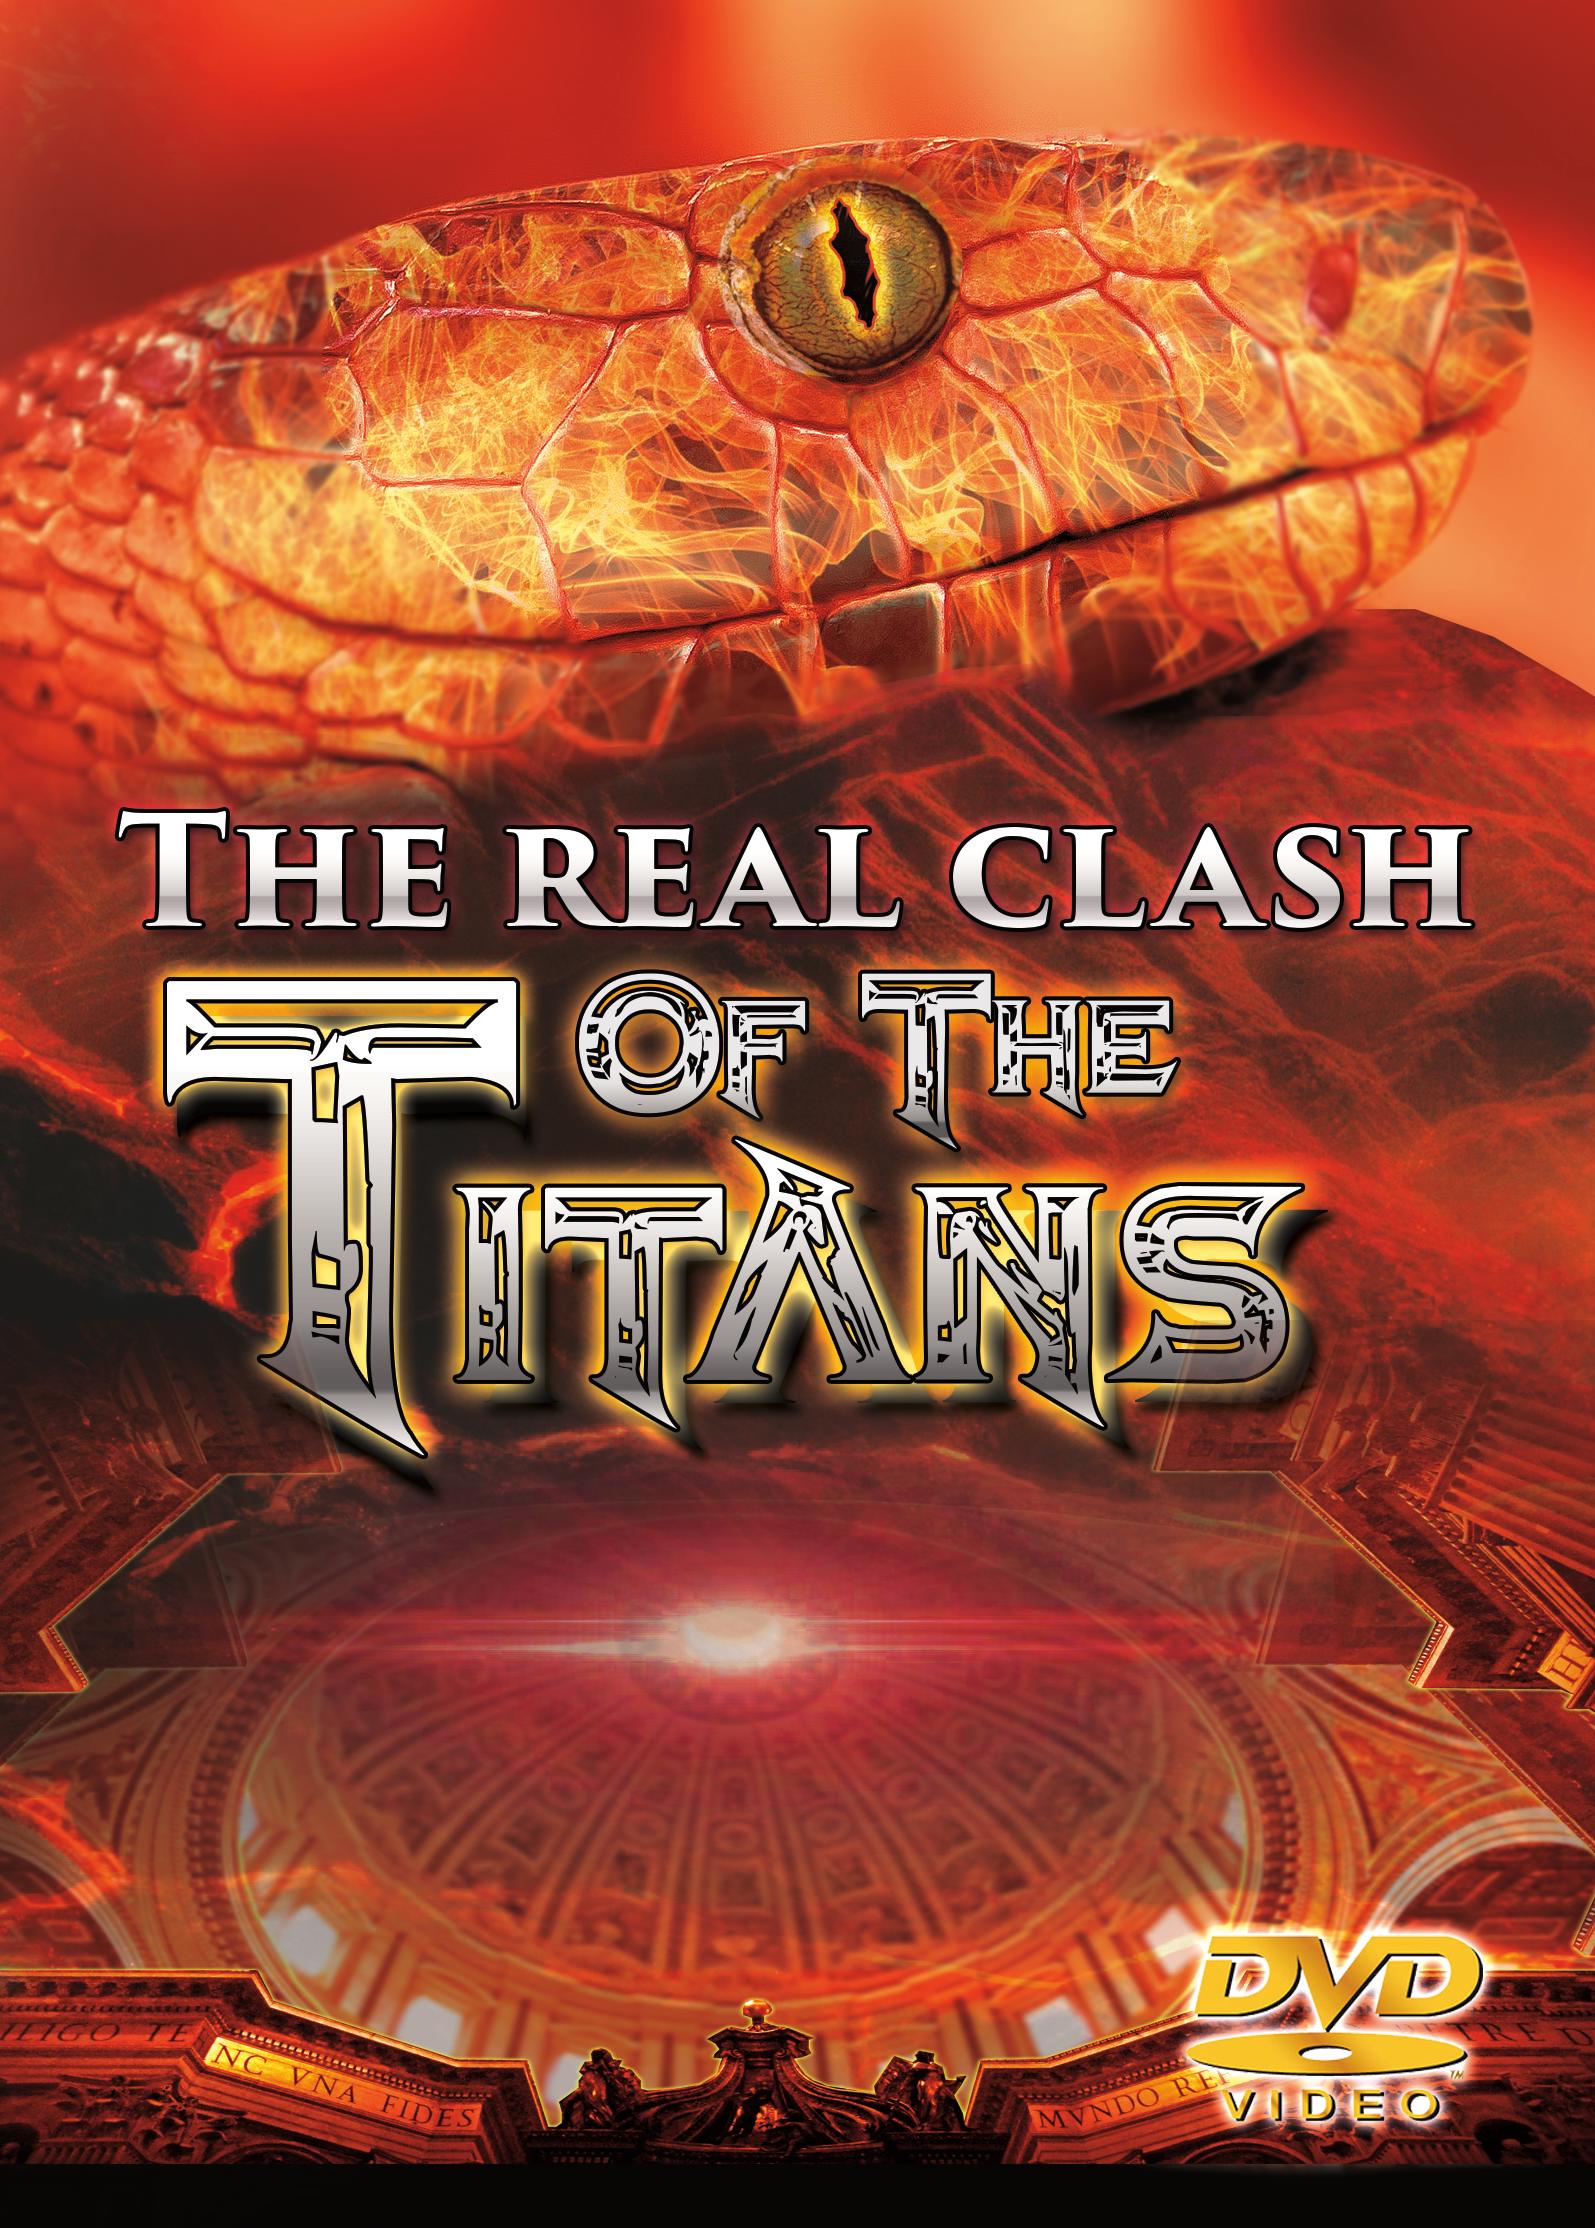 New PS3 Value Pack Features 'Clash of the Titans' - Eye Crave Network